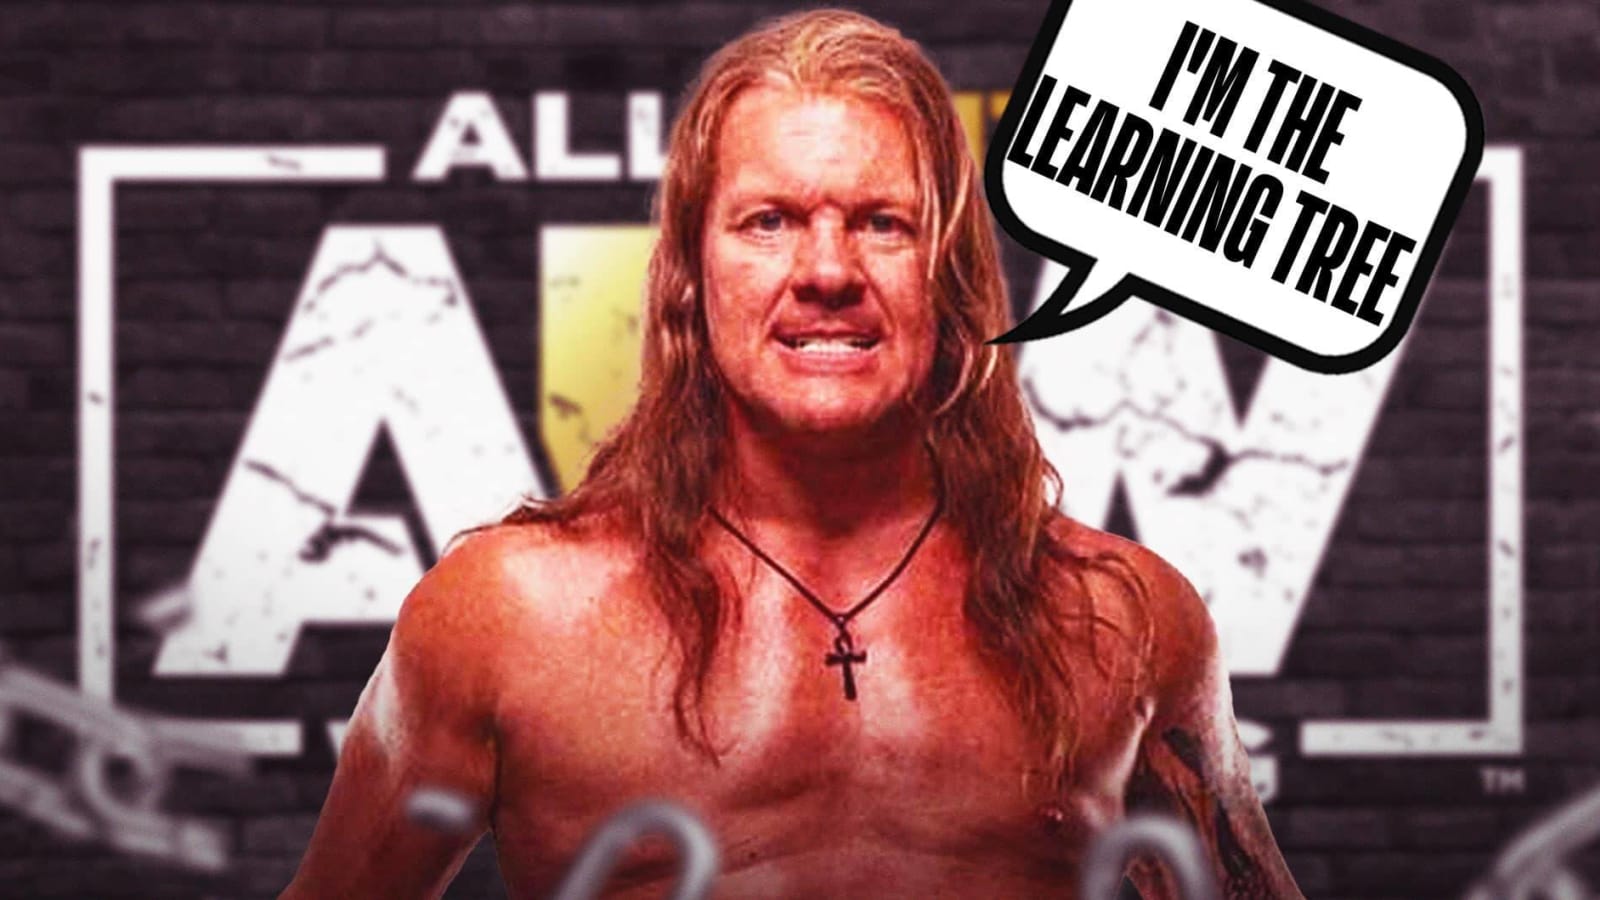 Chris Jericho explains the rationale behind his new Learning Tree heel turn